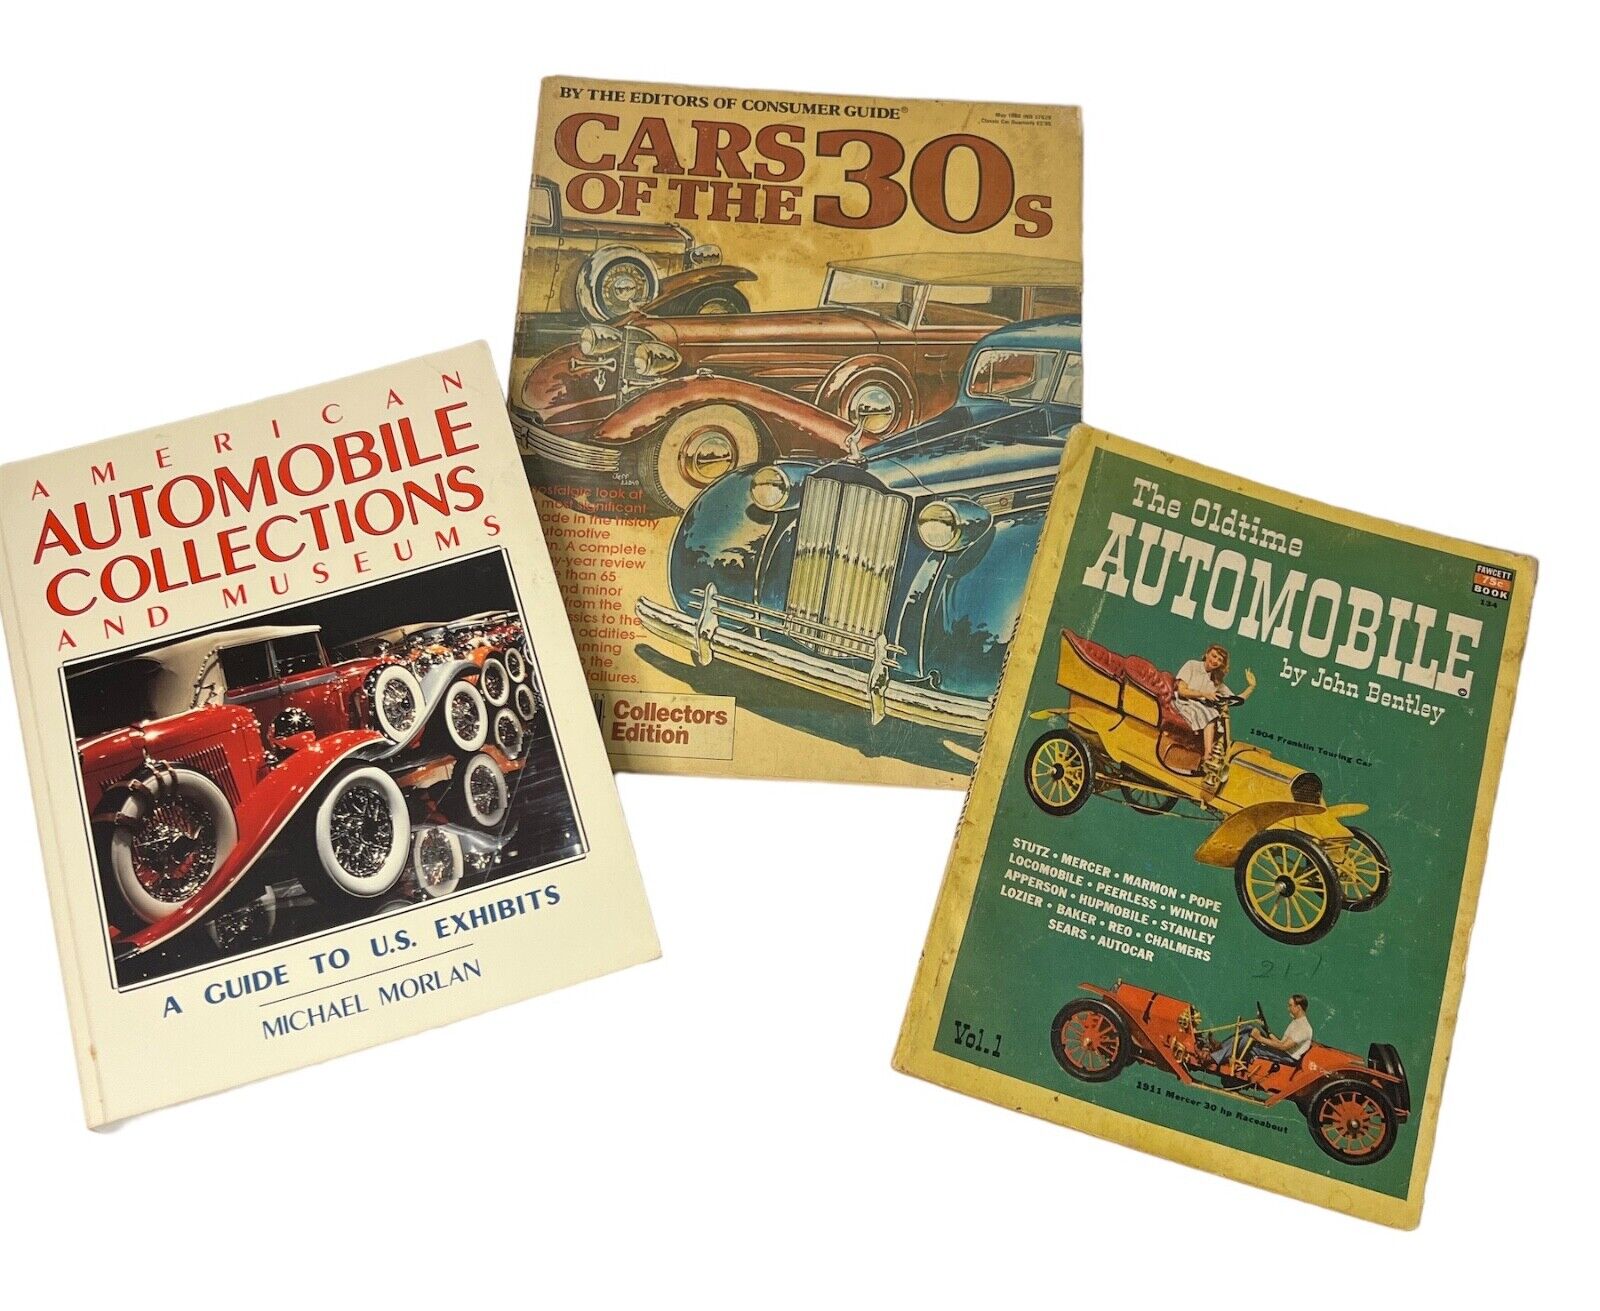 Oldtime Automobile / Cars of the 30s / Automobile Collections Books